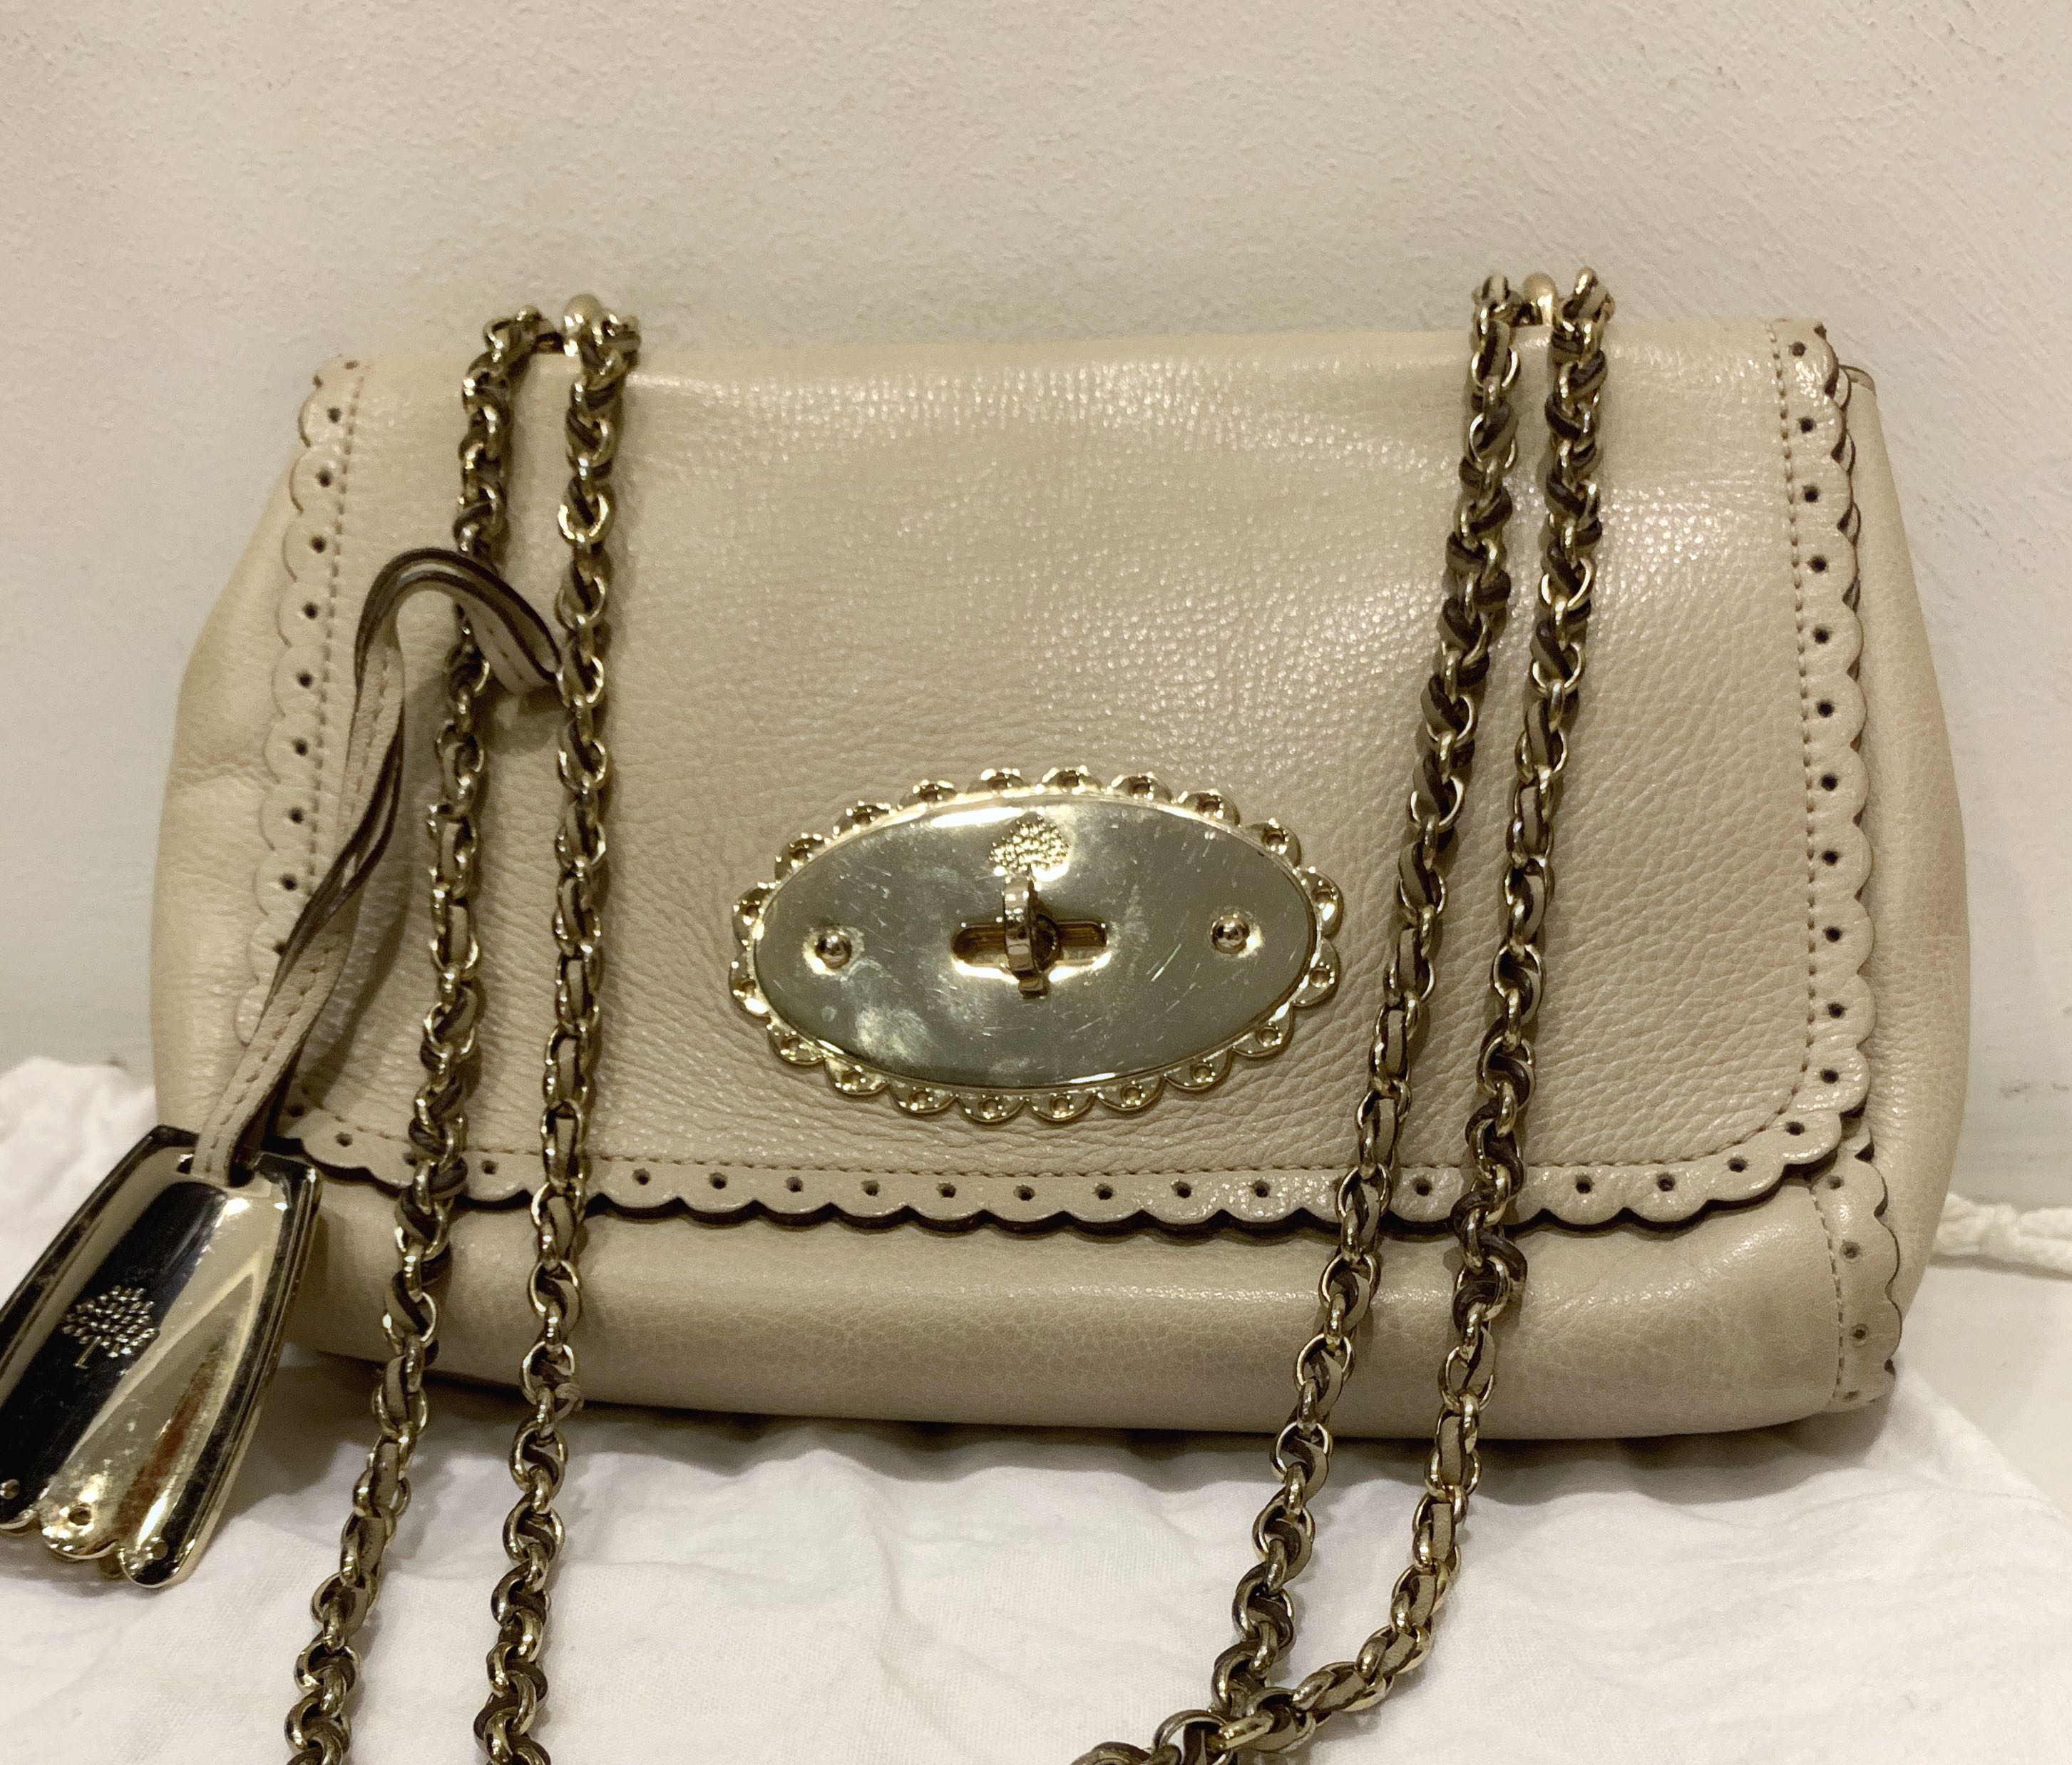 Women's Lily Small Bag by Mulberry | Coltorti Boutique